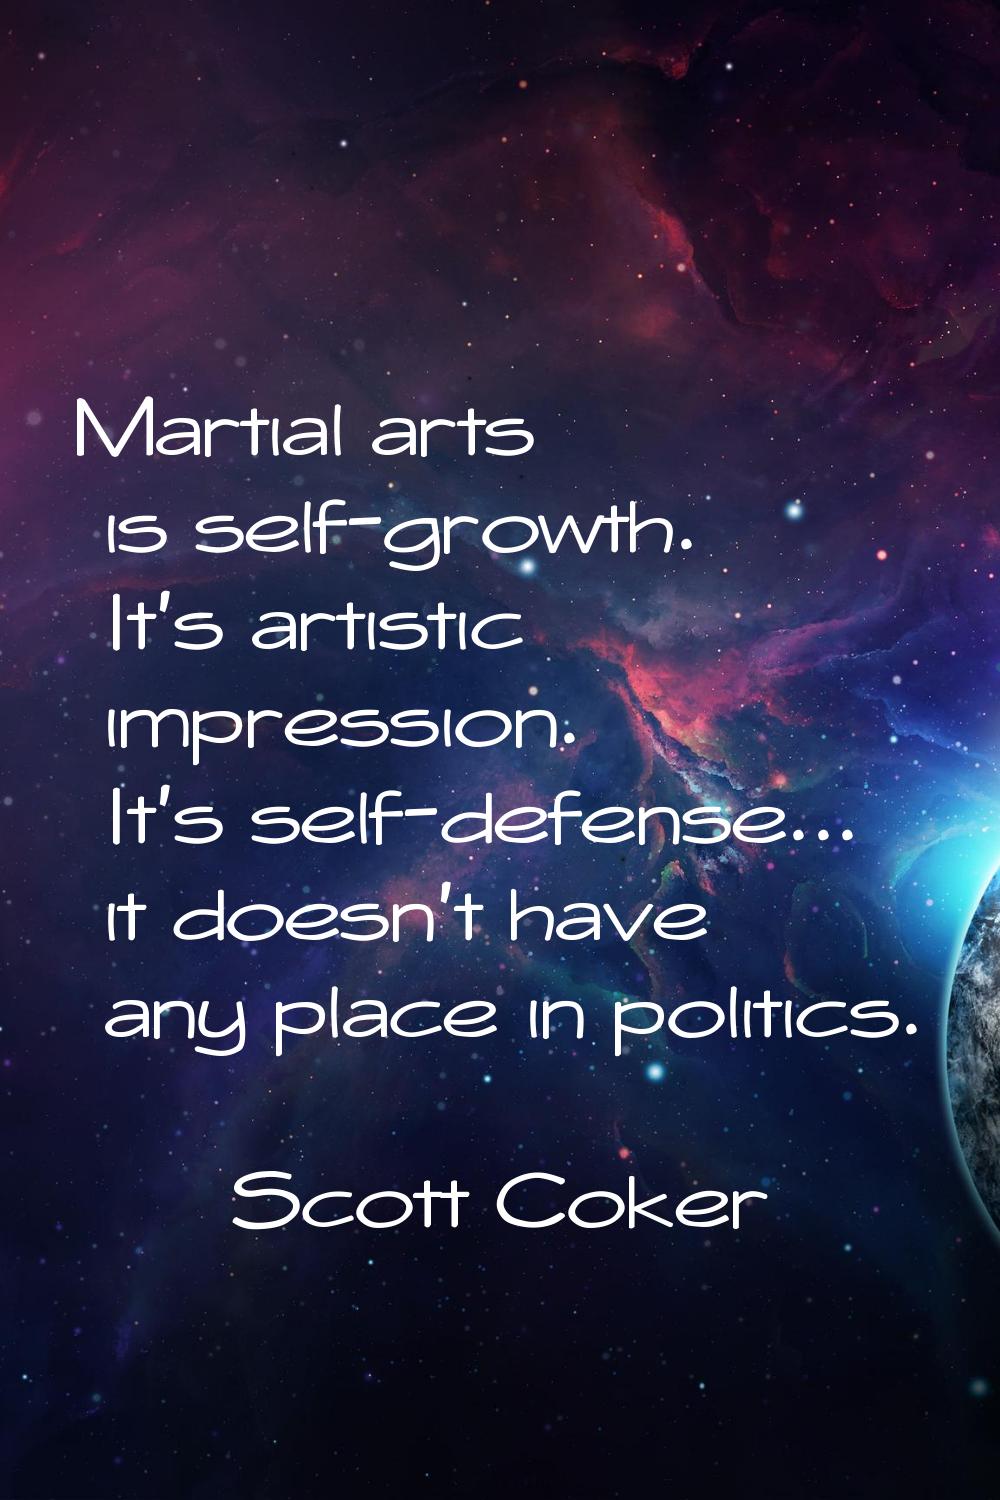 Martial arts is self-growth. It's artistic impression. It's self-defense... it doesn't have any pla